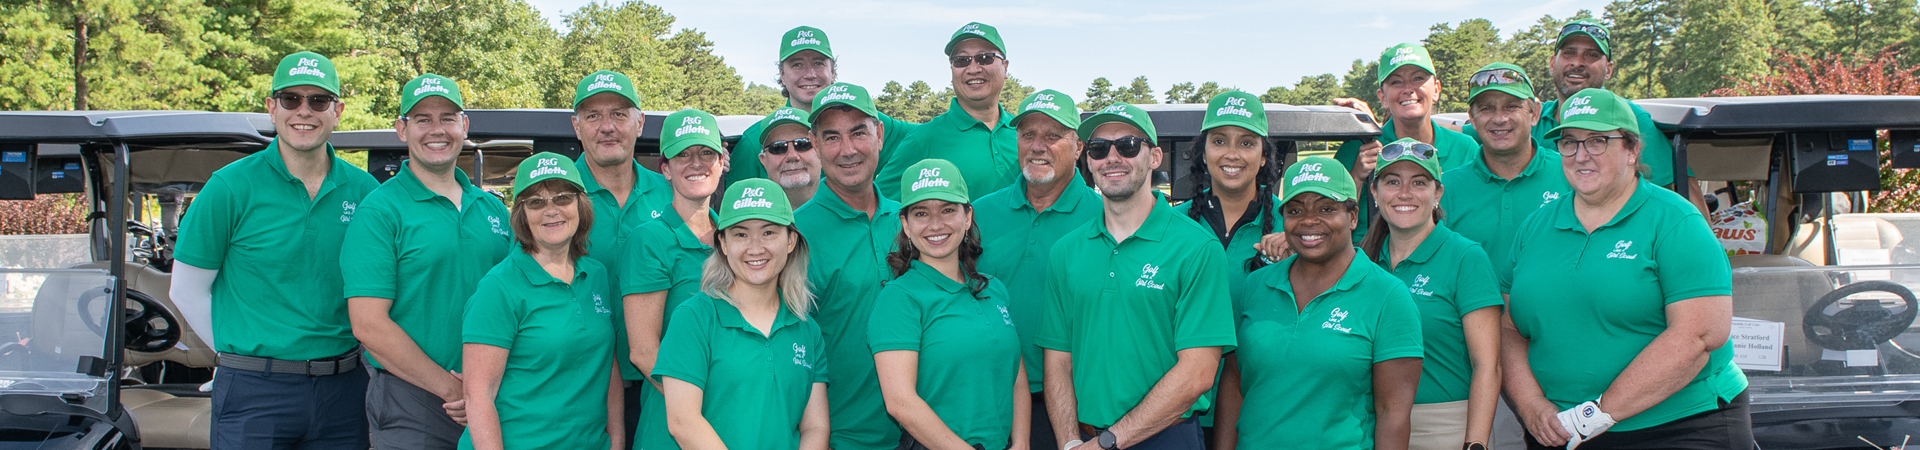  group of corporate partners at the golf tournament  